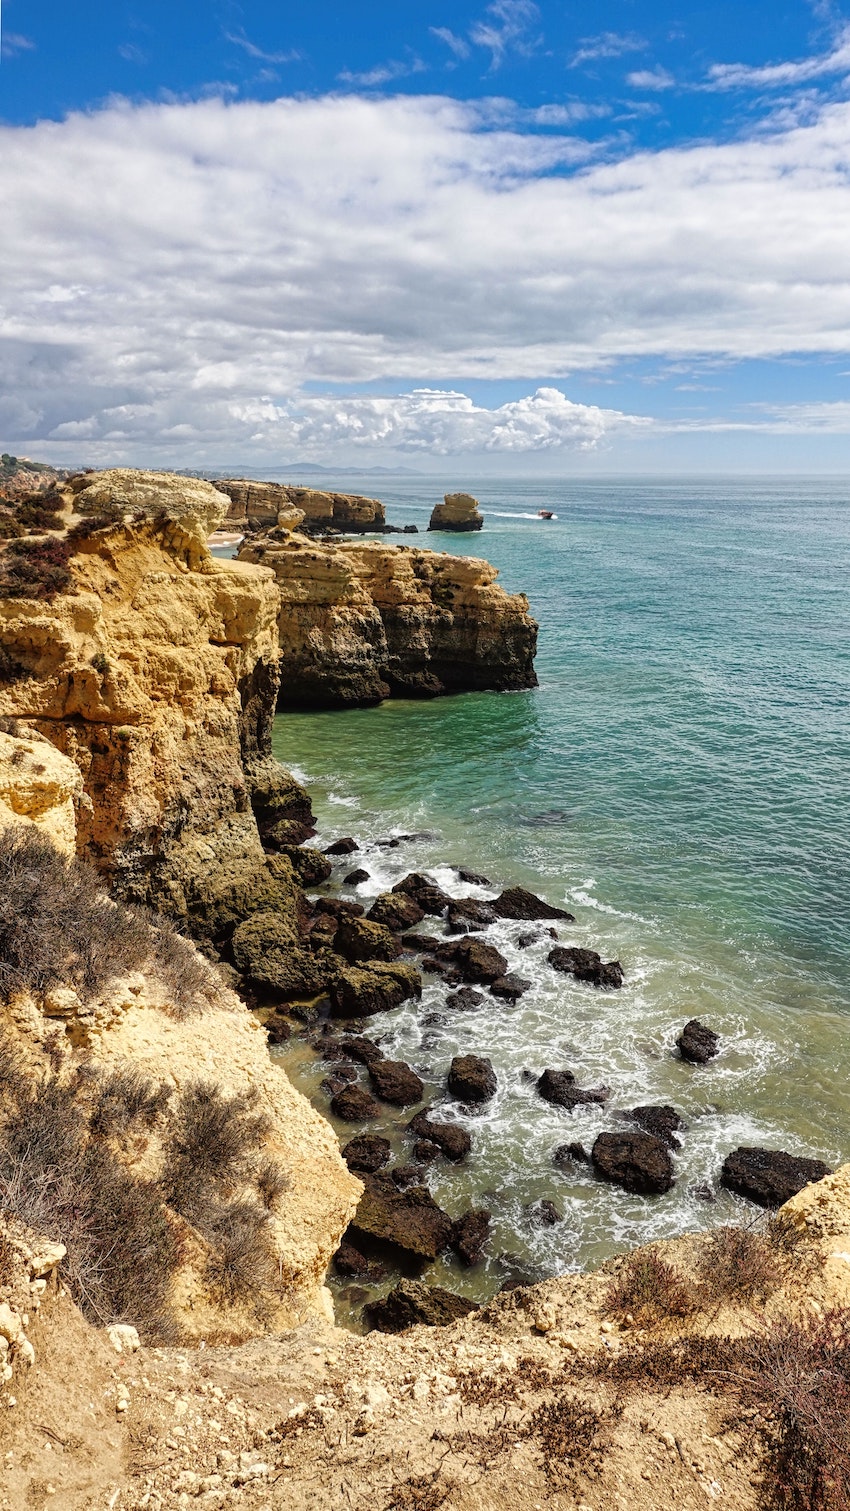 3 Quick Travel Tips - Packing for a Winter Sun Getaway - Albufeira, Portugal